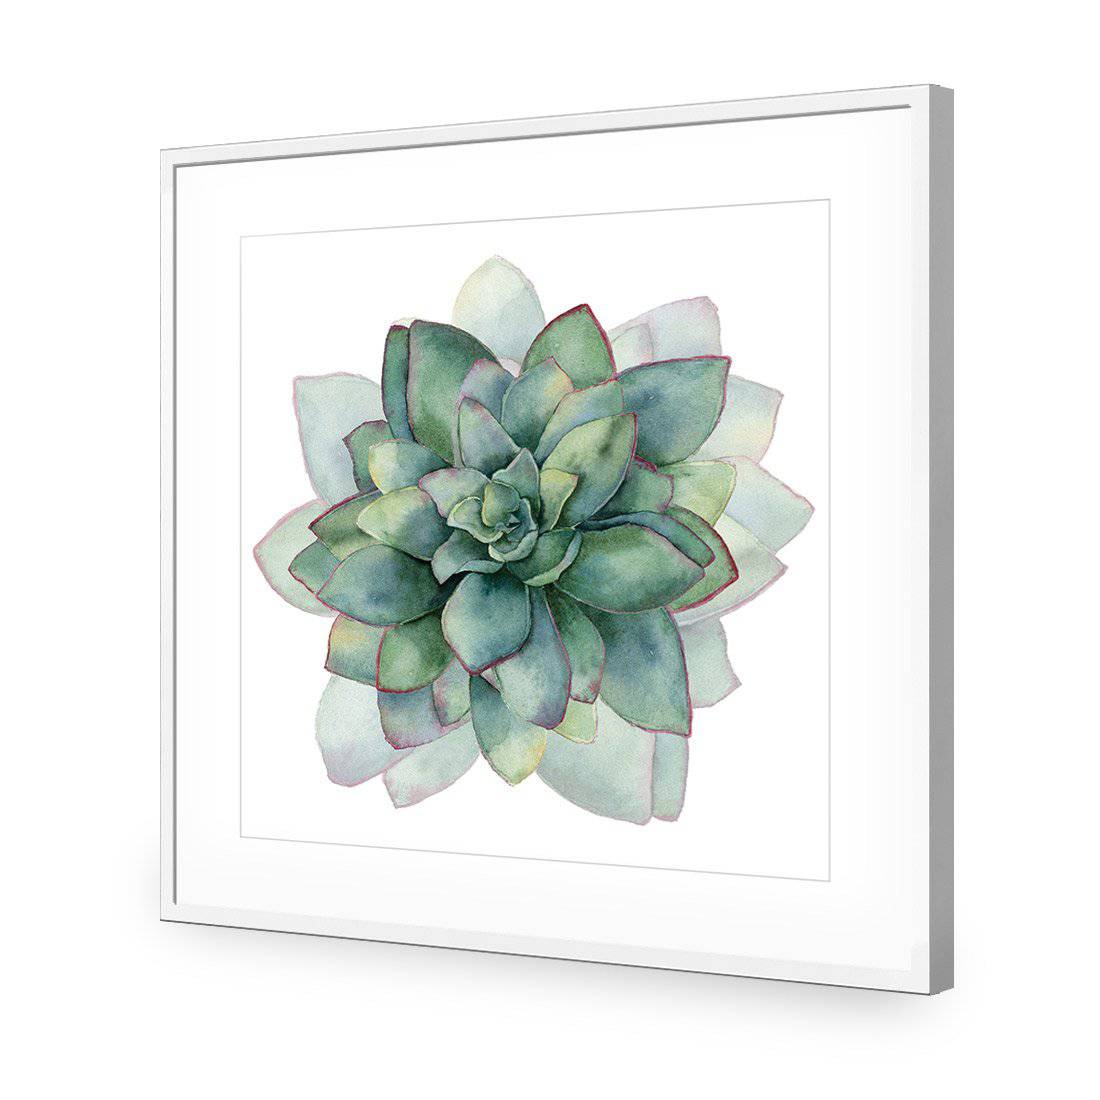 Succulent Spiral, Square-Acrylic-Wall Art Design-With Border-Acrylic - White Frame-37x37cm-Wall Art Designs